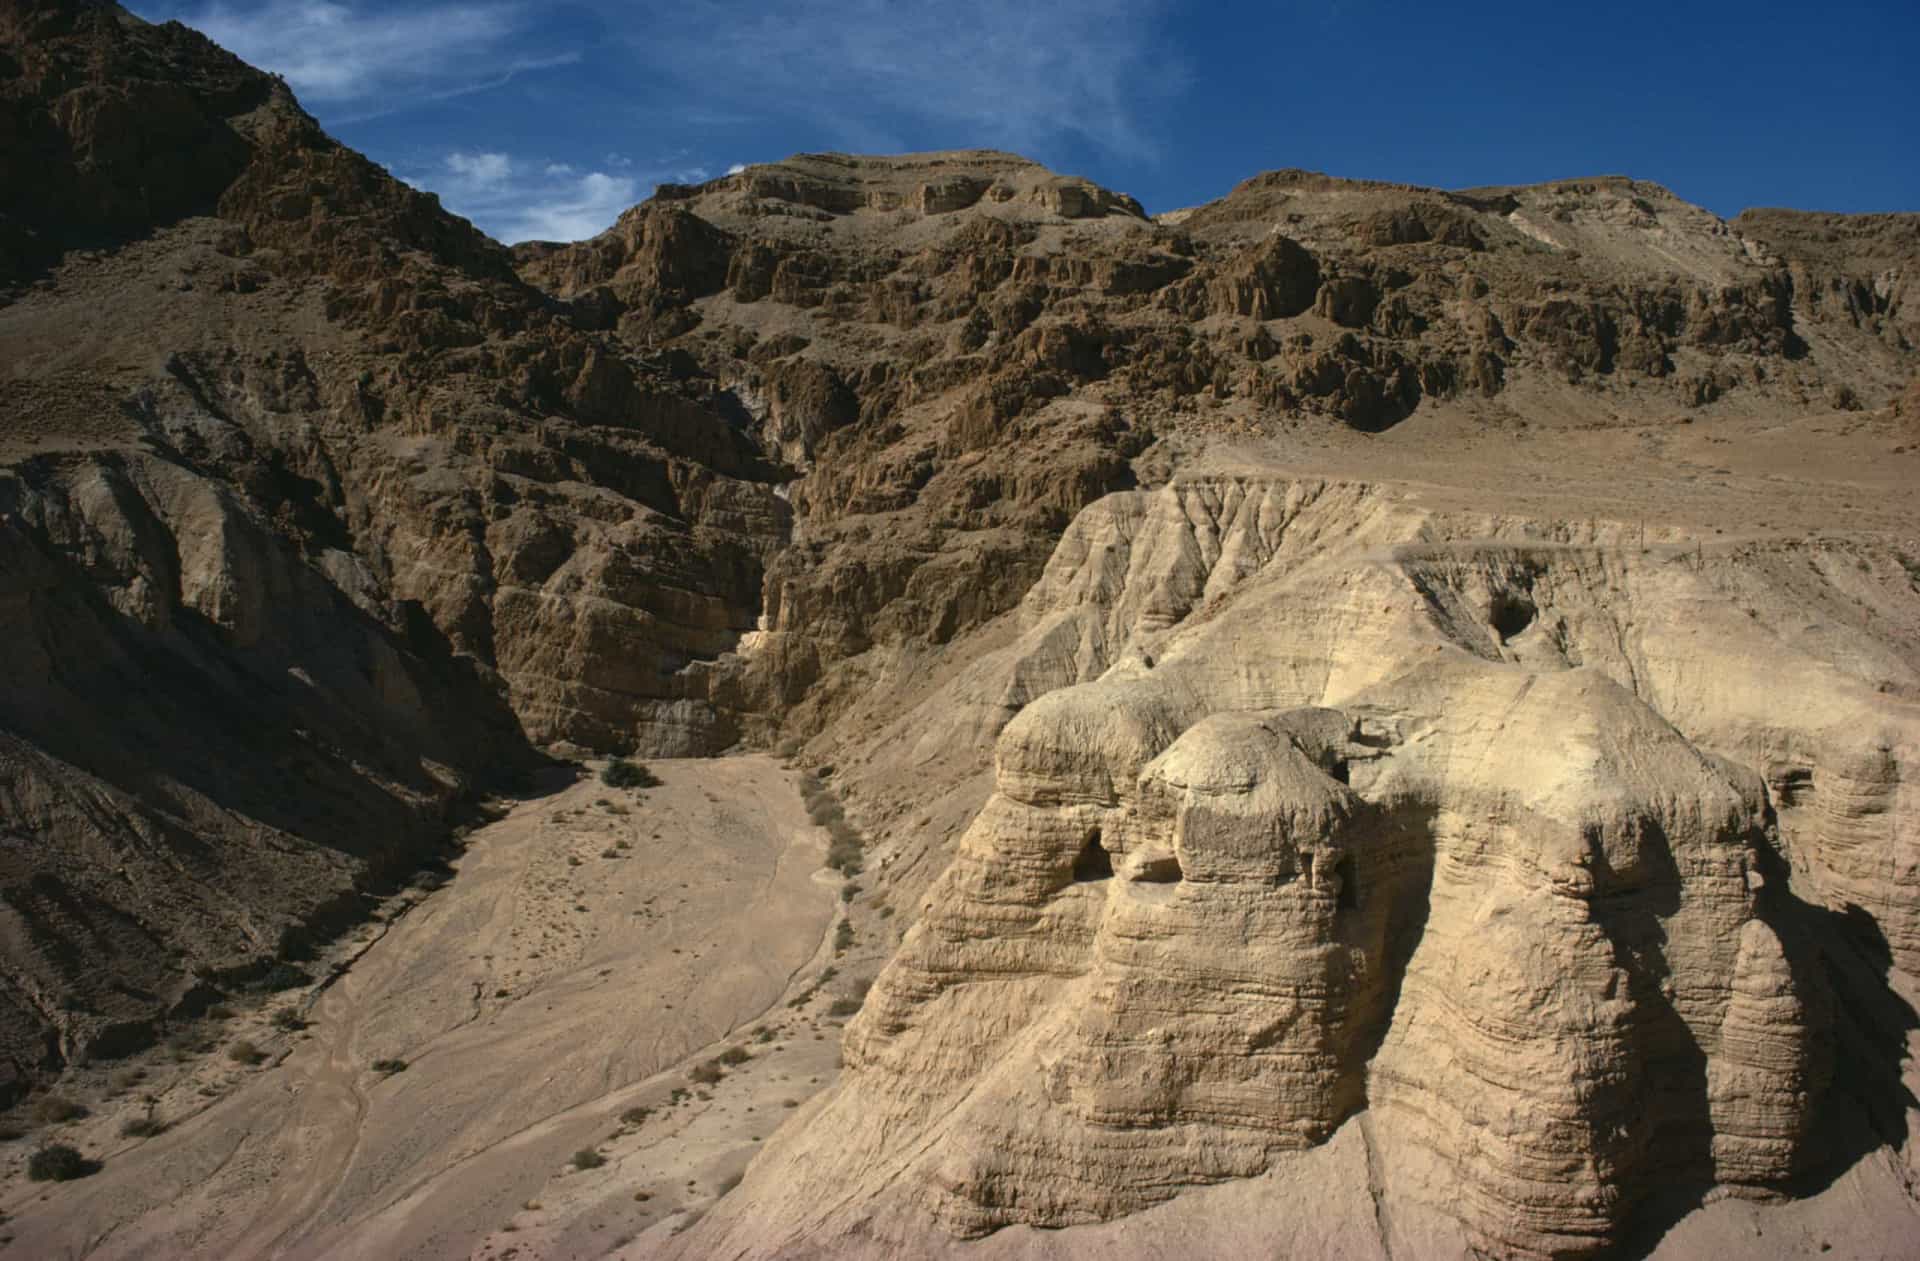 <p>Qumran in the West Bank is the settlement nearest to the Qumran Caves where the first of the ancient Hebrew and Aramaic texts known as the Dead Sea Scrolls were hidden and ultimately discovered in the late 1940s.</p>